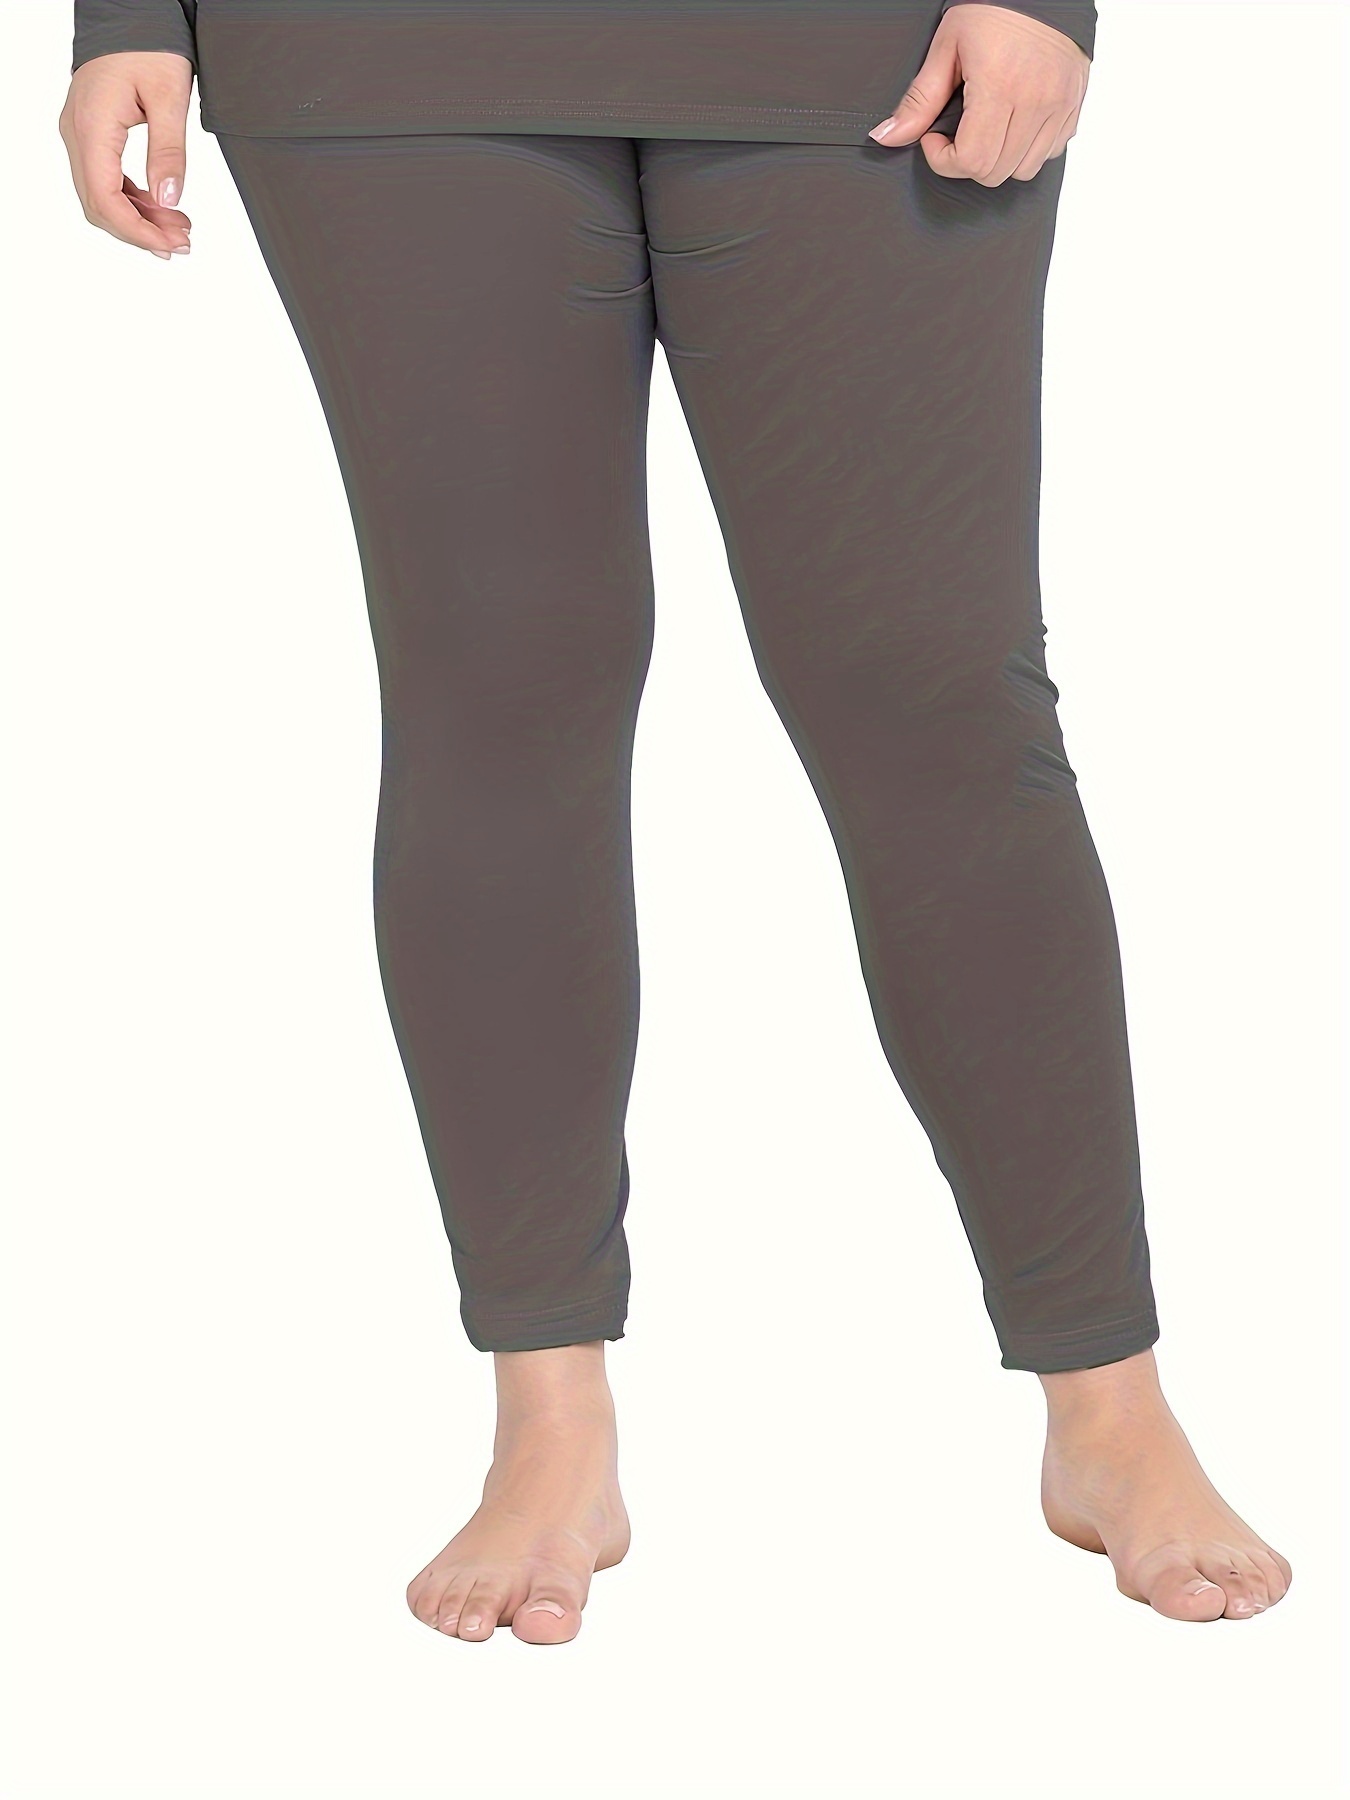 Plus Size Casual Thermal Leggings, Women's Plus High Waisted